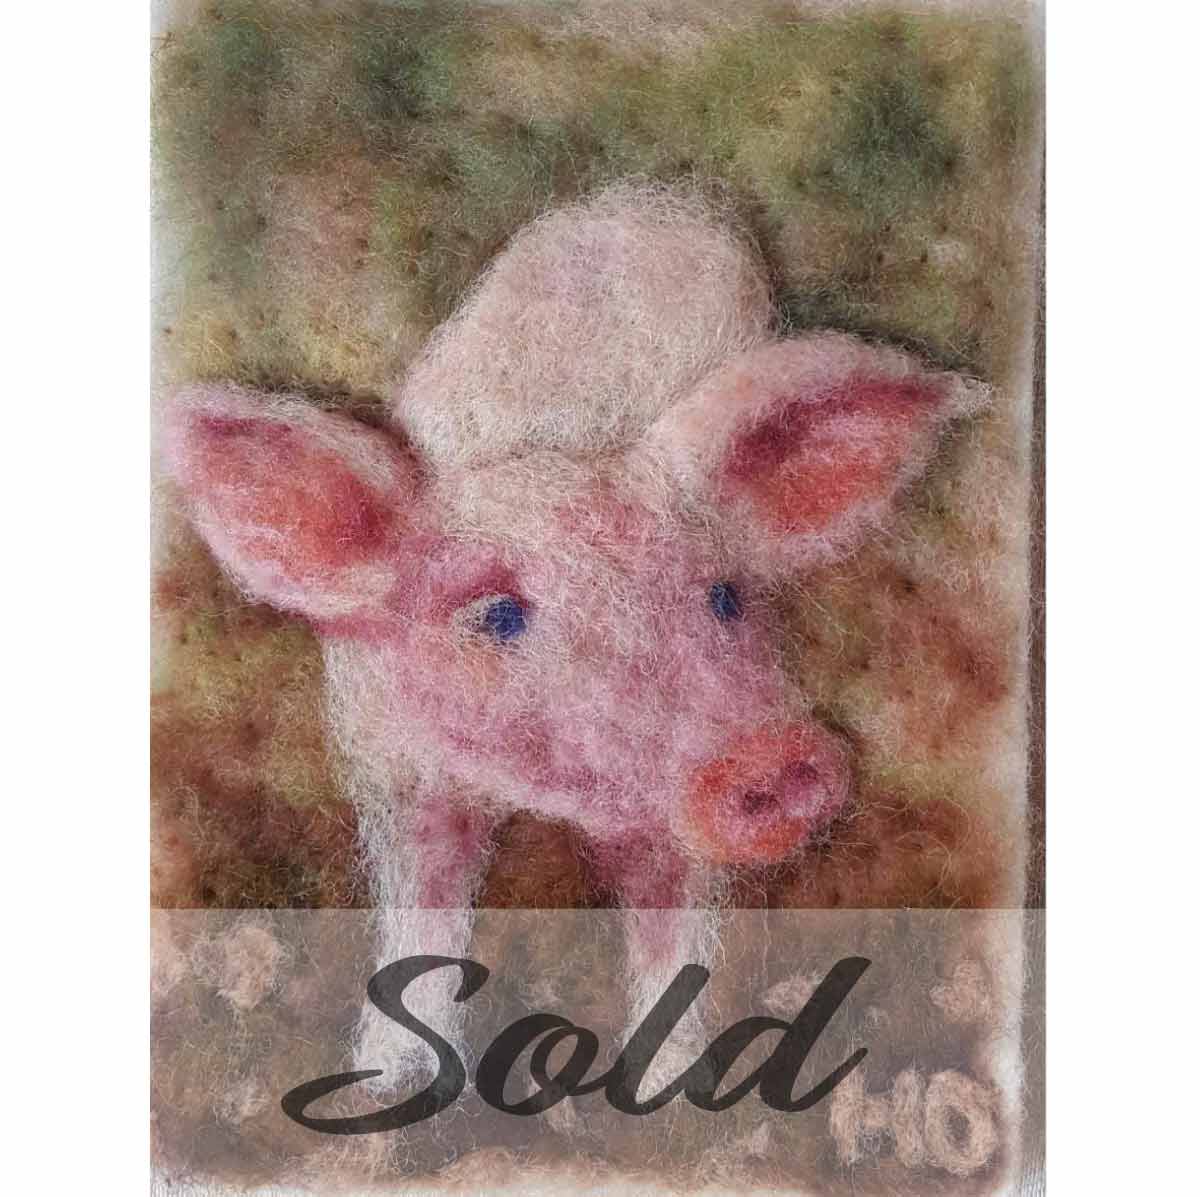 Piglet-original-wool-felted-illustration-by-Hillary-Dow